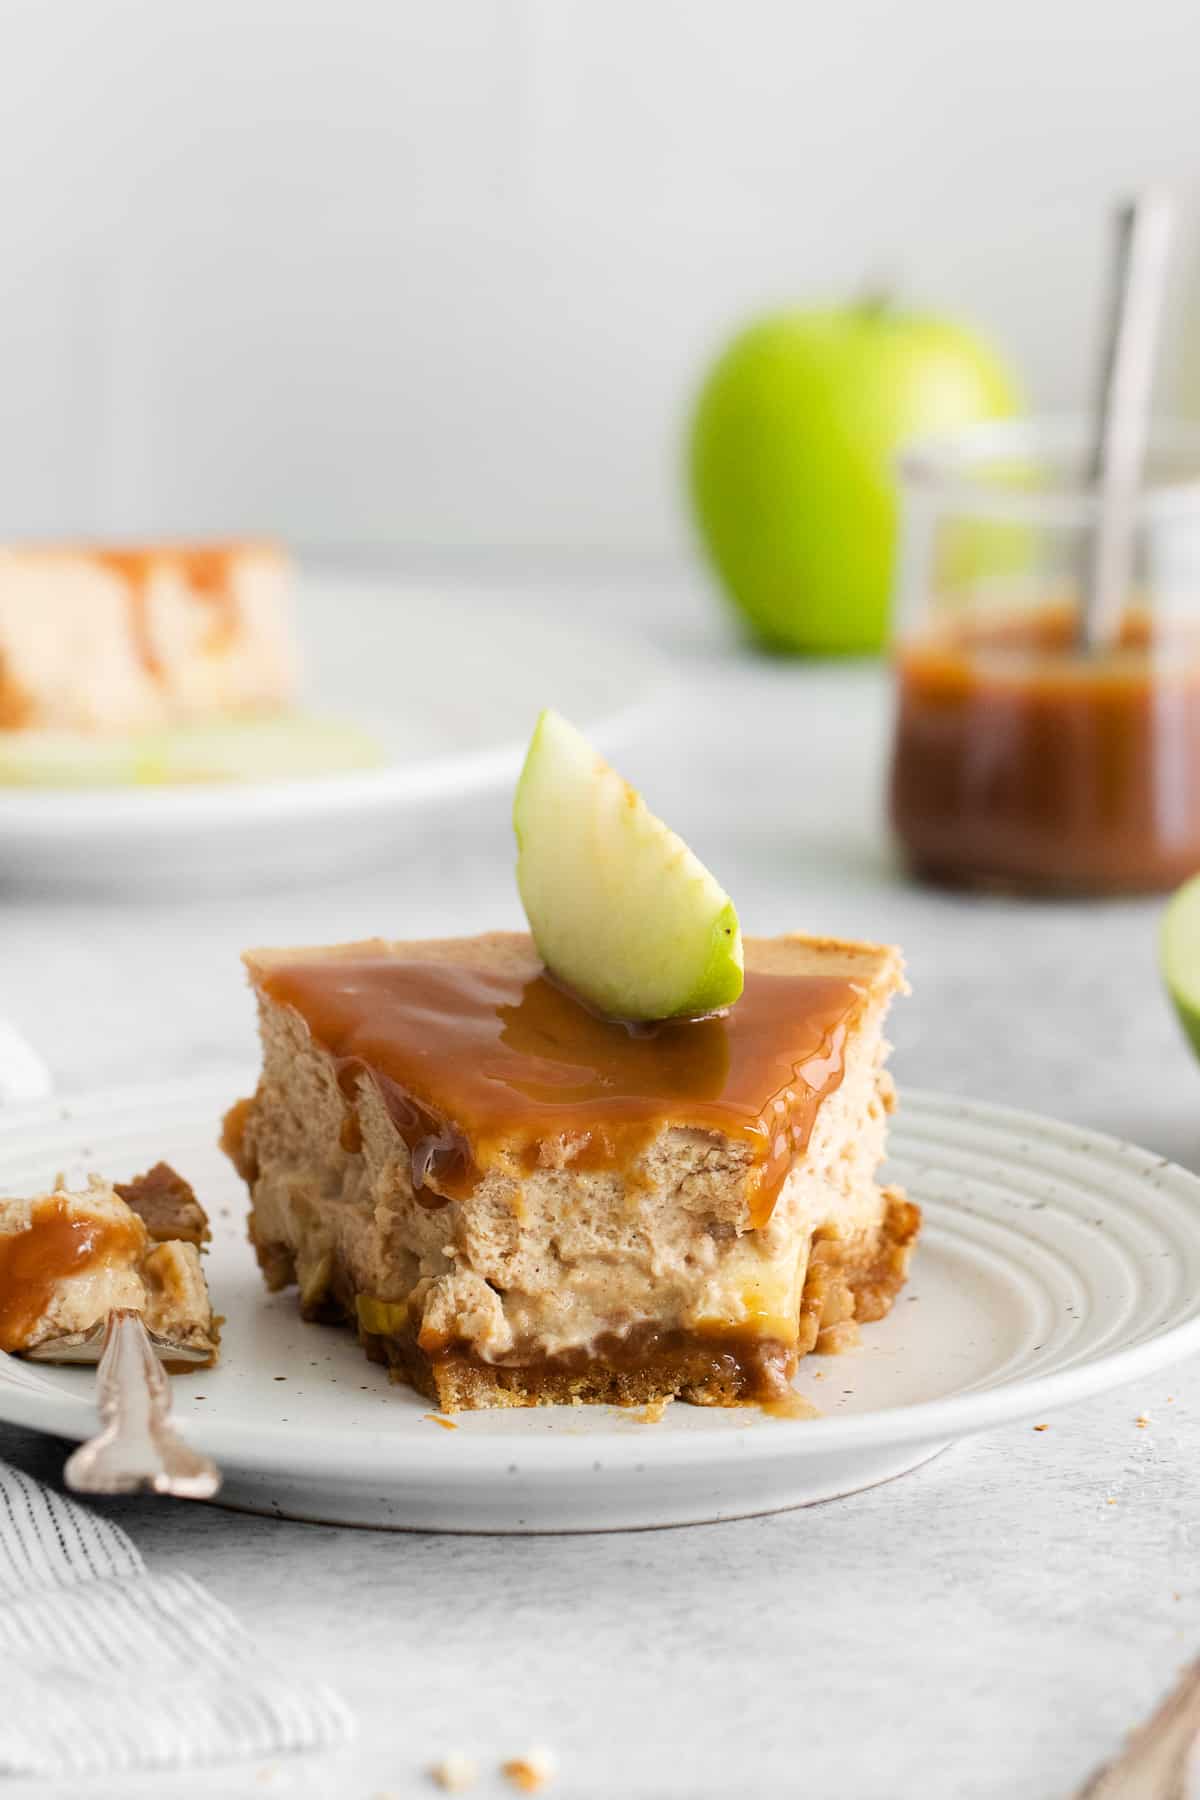 Slice of caramel apple cheesecake on a plate.